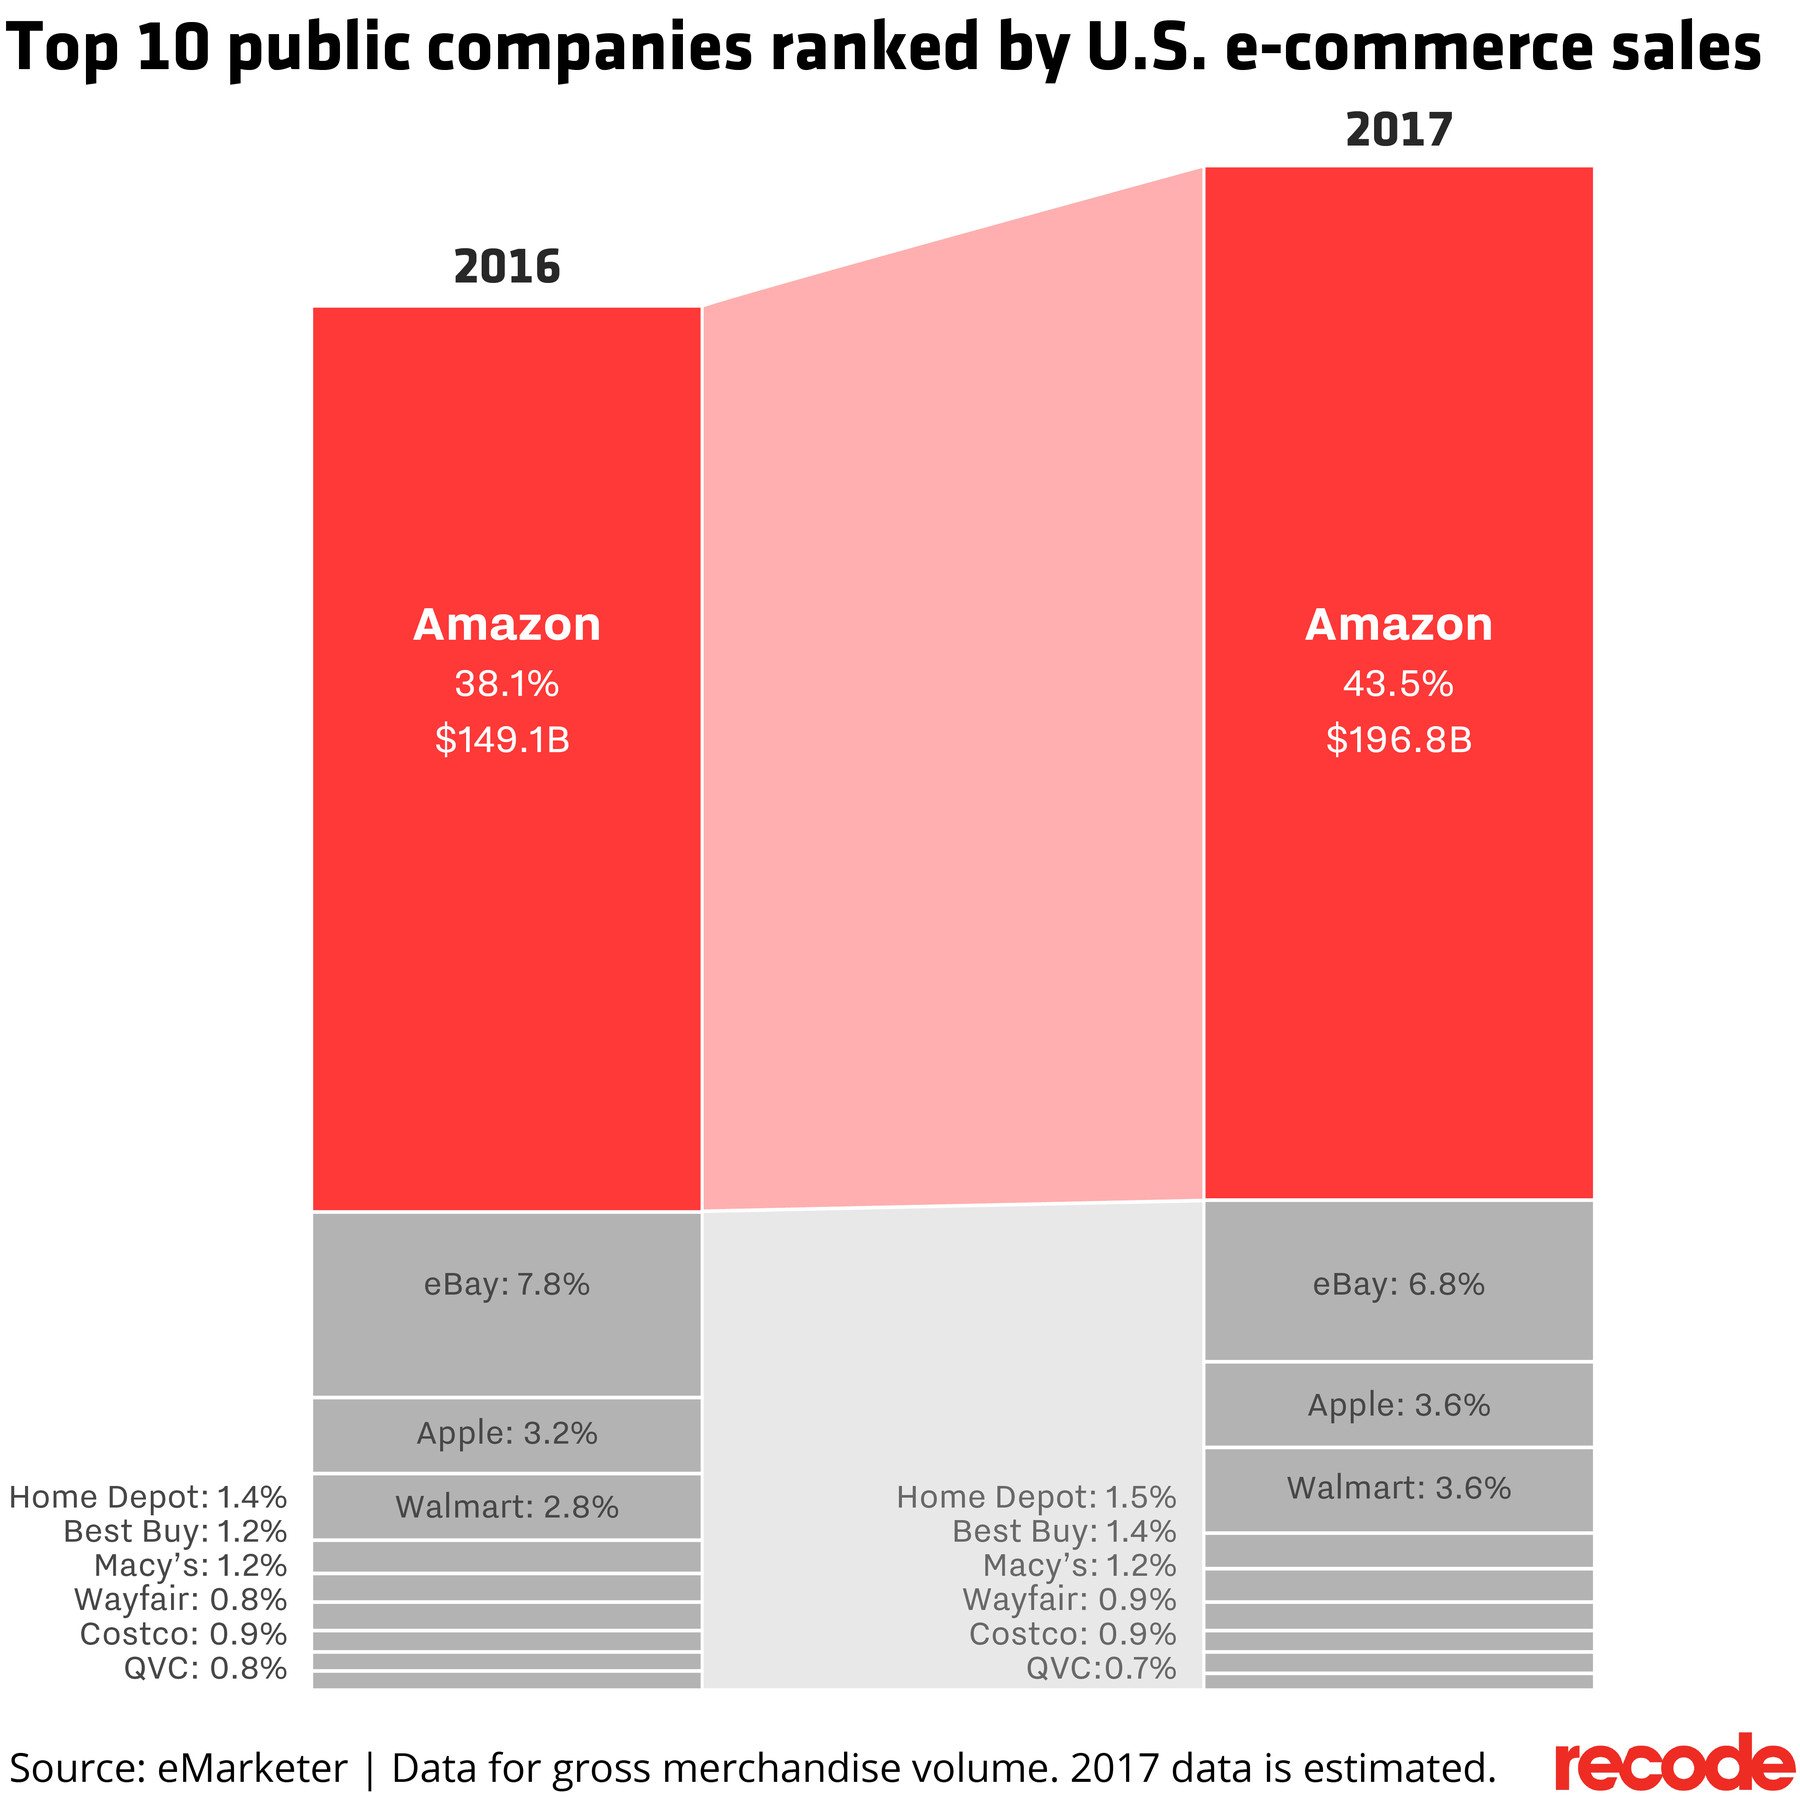 Top 10 public companies ranked by US e-commerce sales